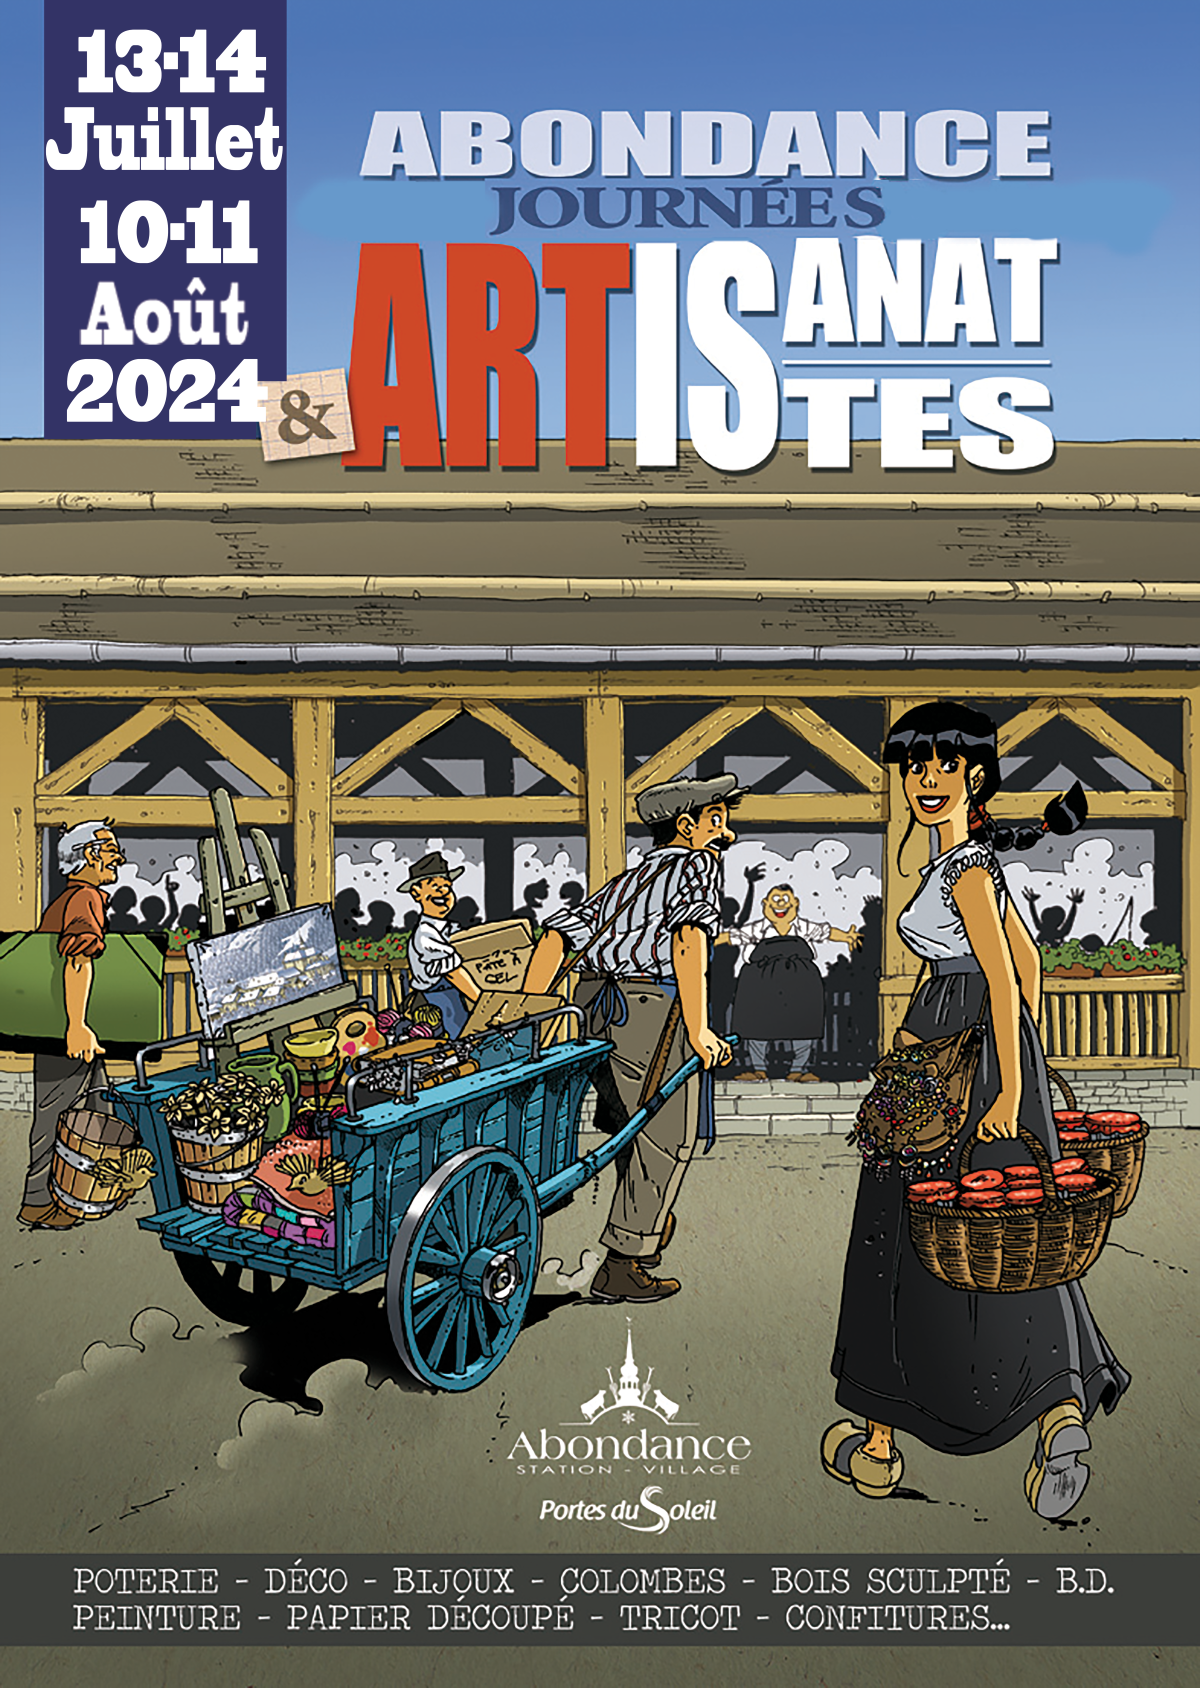 Artcraft and artists Day in Abondance